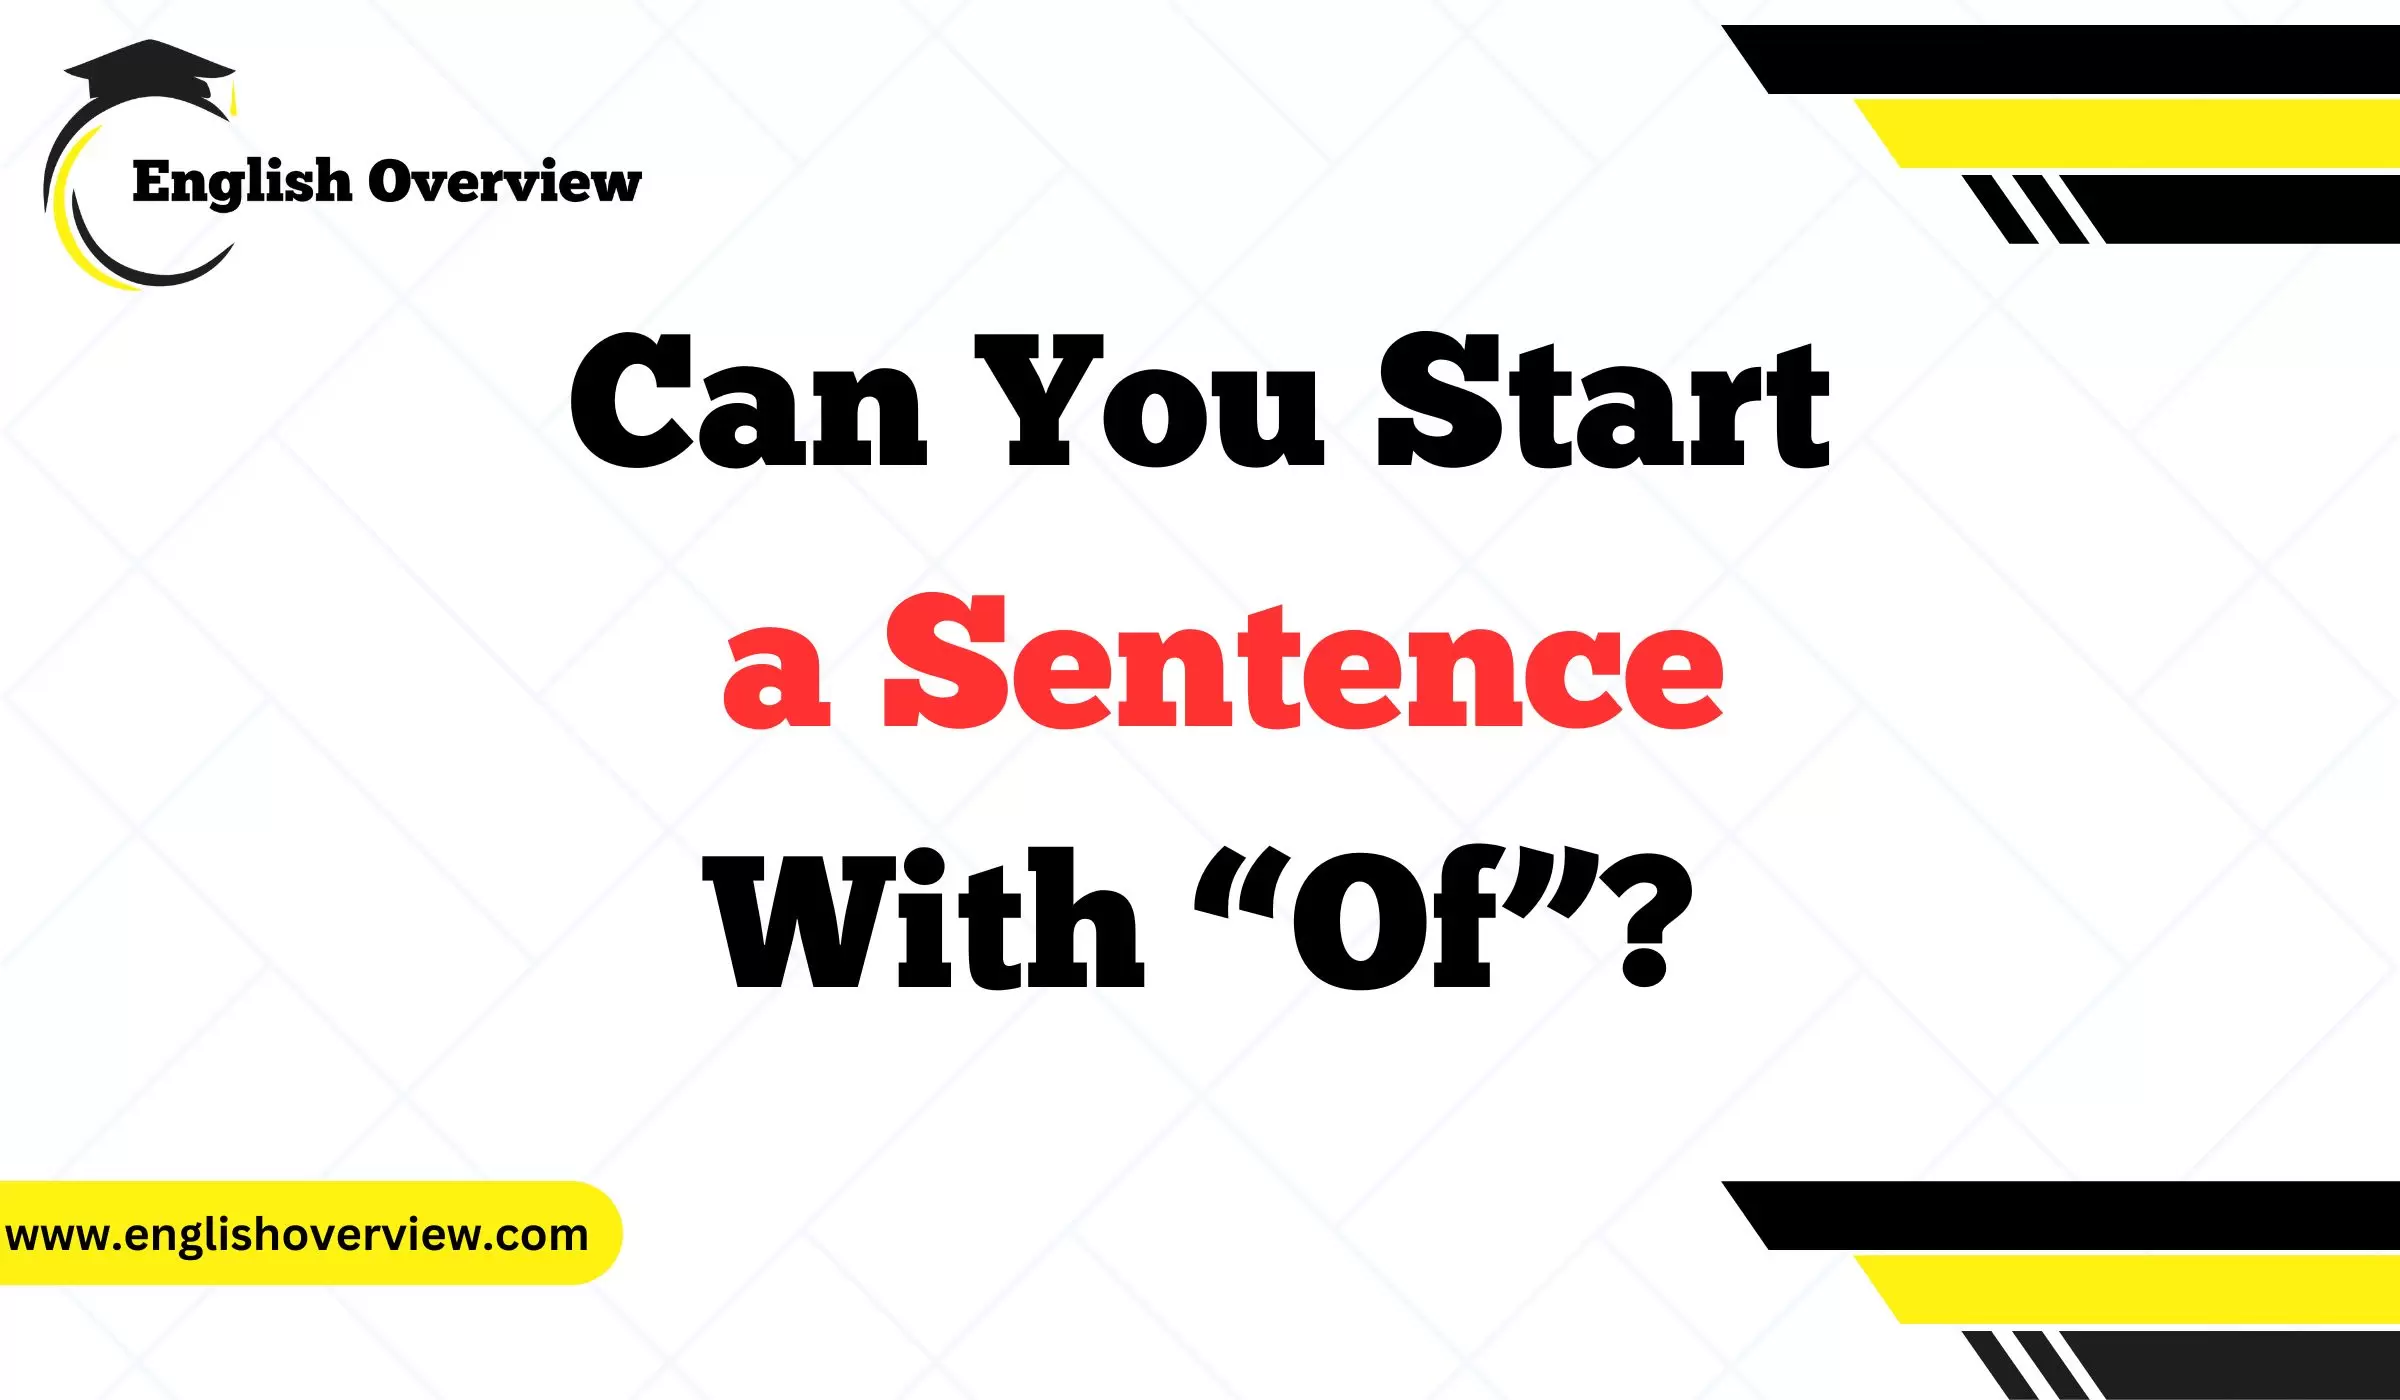 Can You Start a Sentence With “Of”